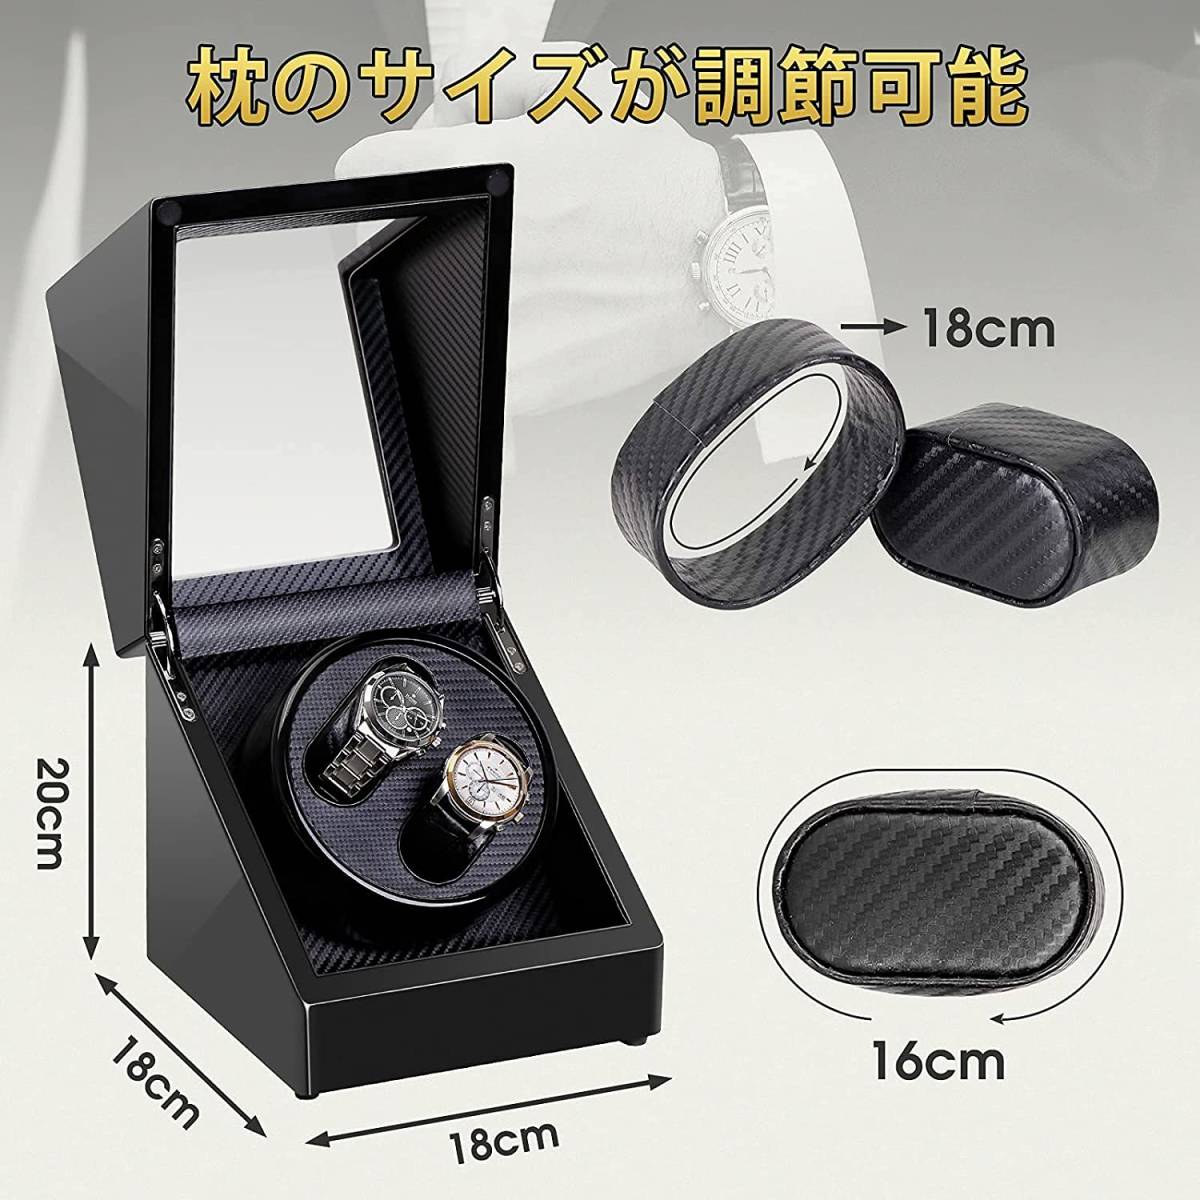  exceedingly convenient winding machine black 2 ps to coil self-winding watch up machine watch my nda- wristwatch box wristwatch self-winding watch box 